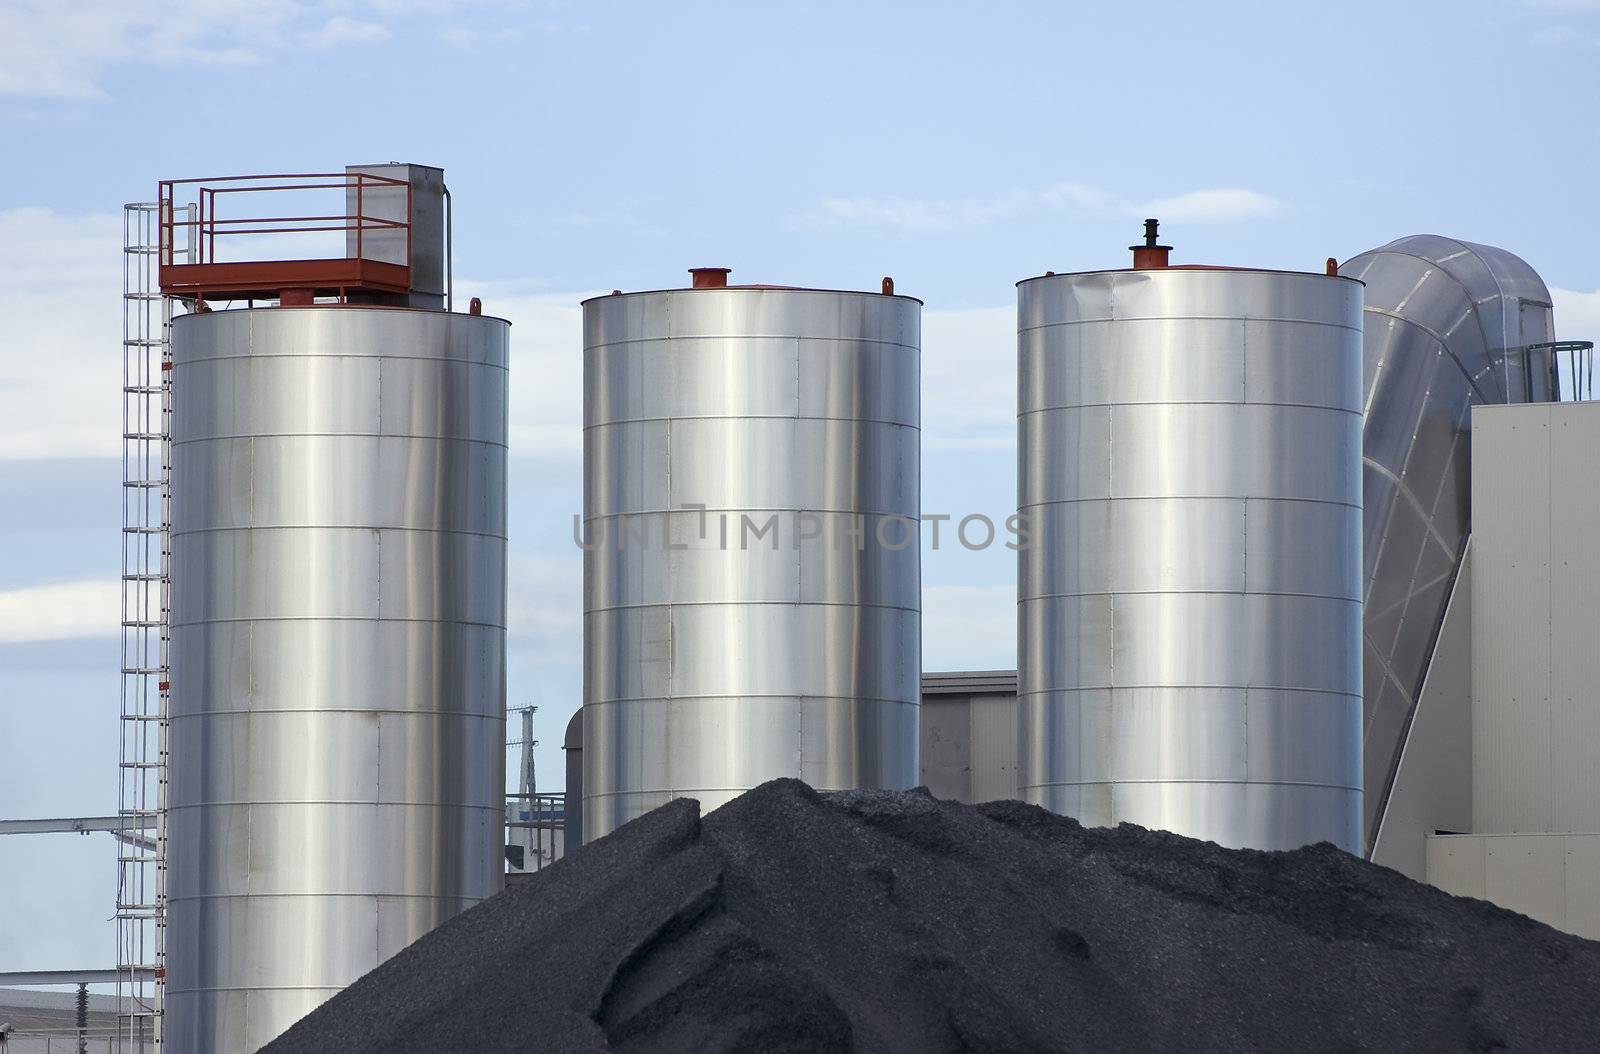 Metallic silos with stack of ground of an industrial plant